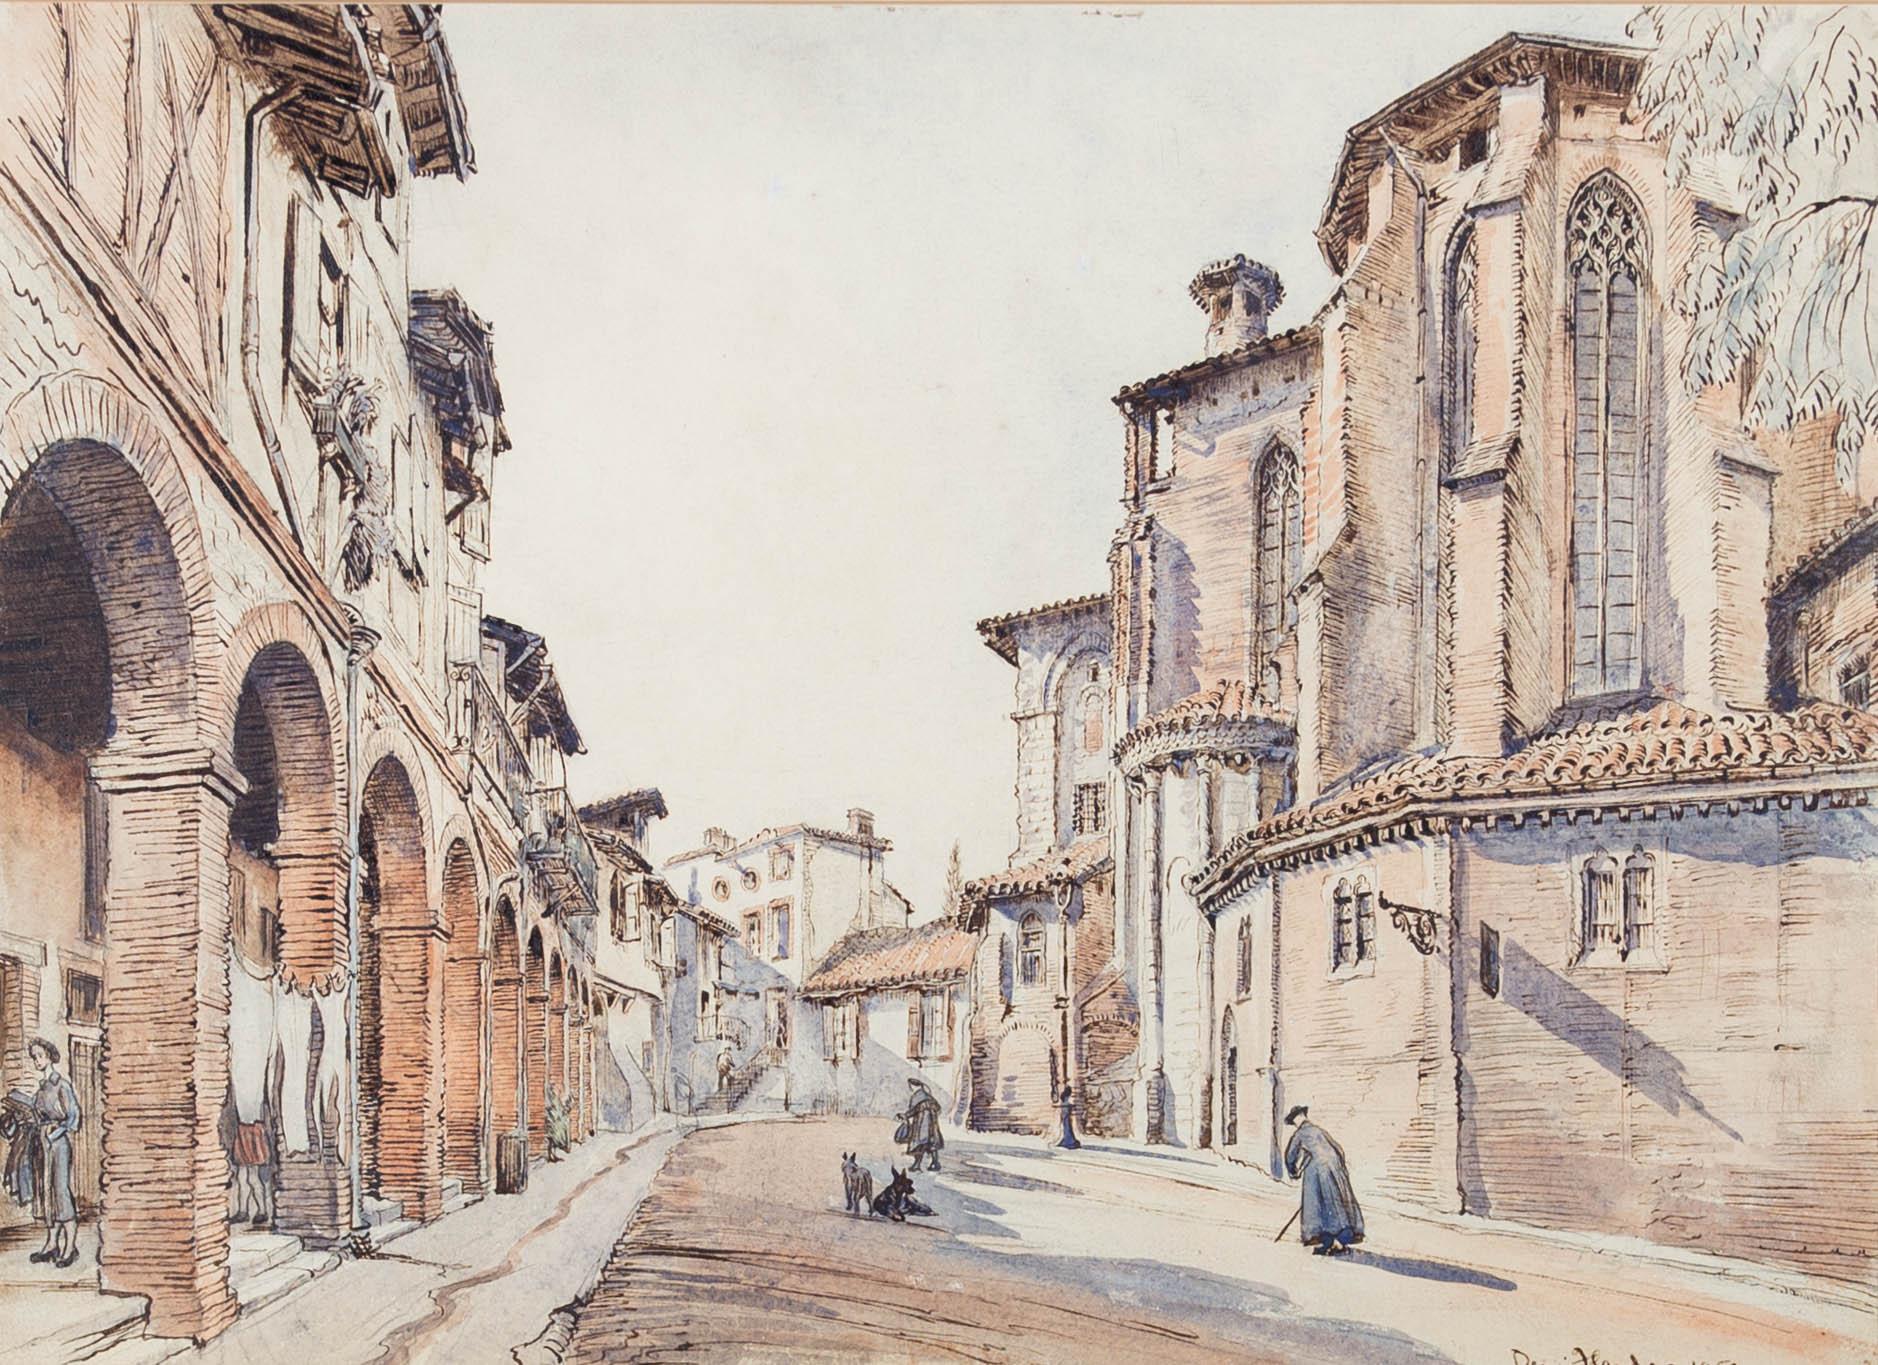 A charming watercolour and ink drawing by Dennis Flanders. This scene captures a quaint courtyard in Languedoc, France using black ink to depict the intricate buildings and figures in the street. Signed and dated to the lower right. On wove.

